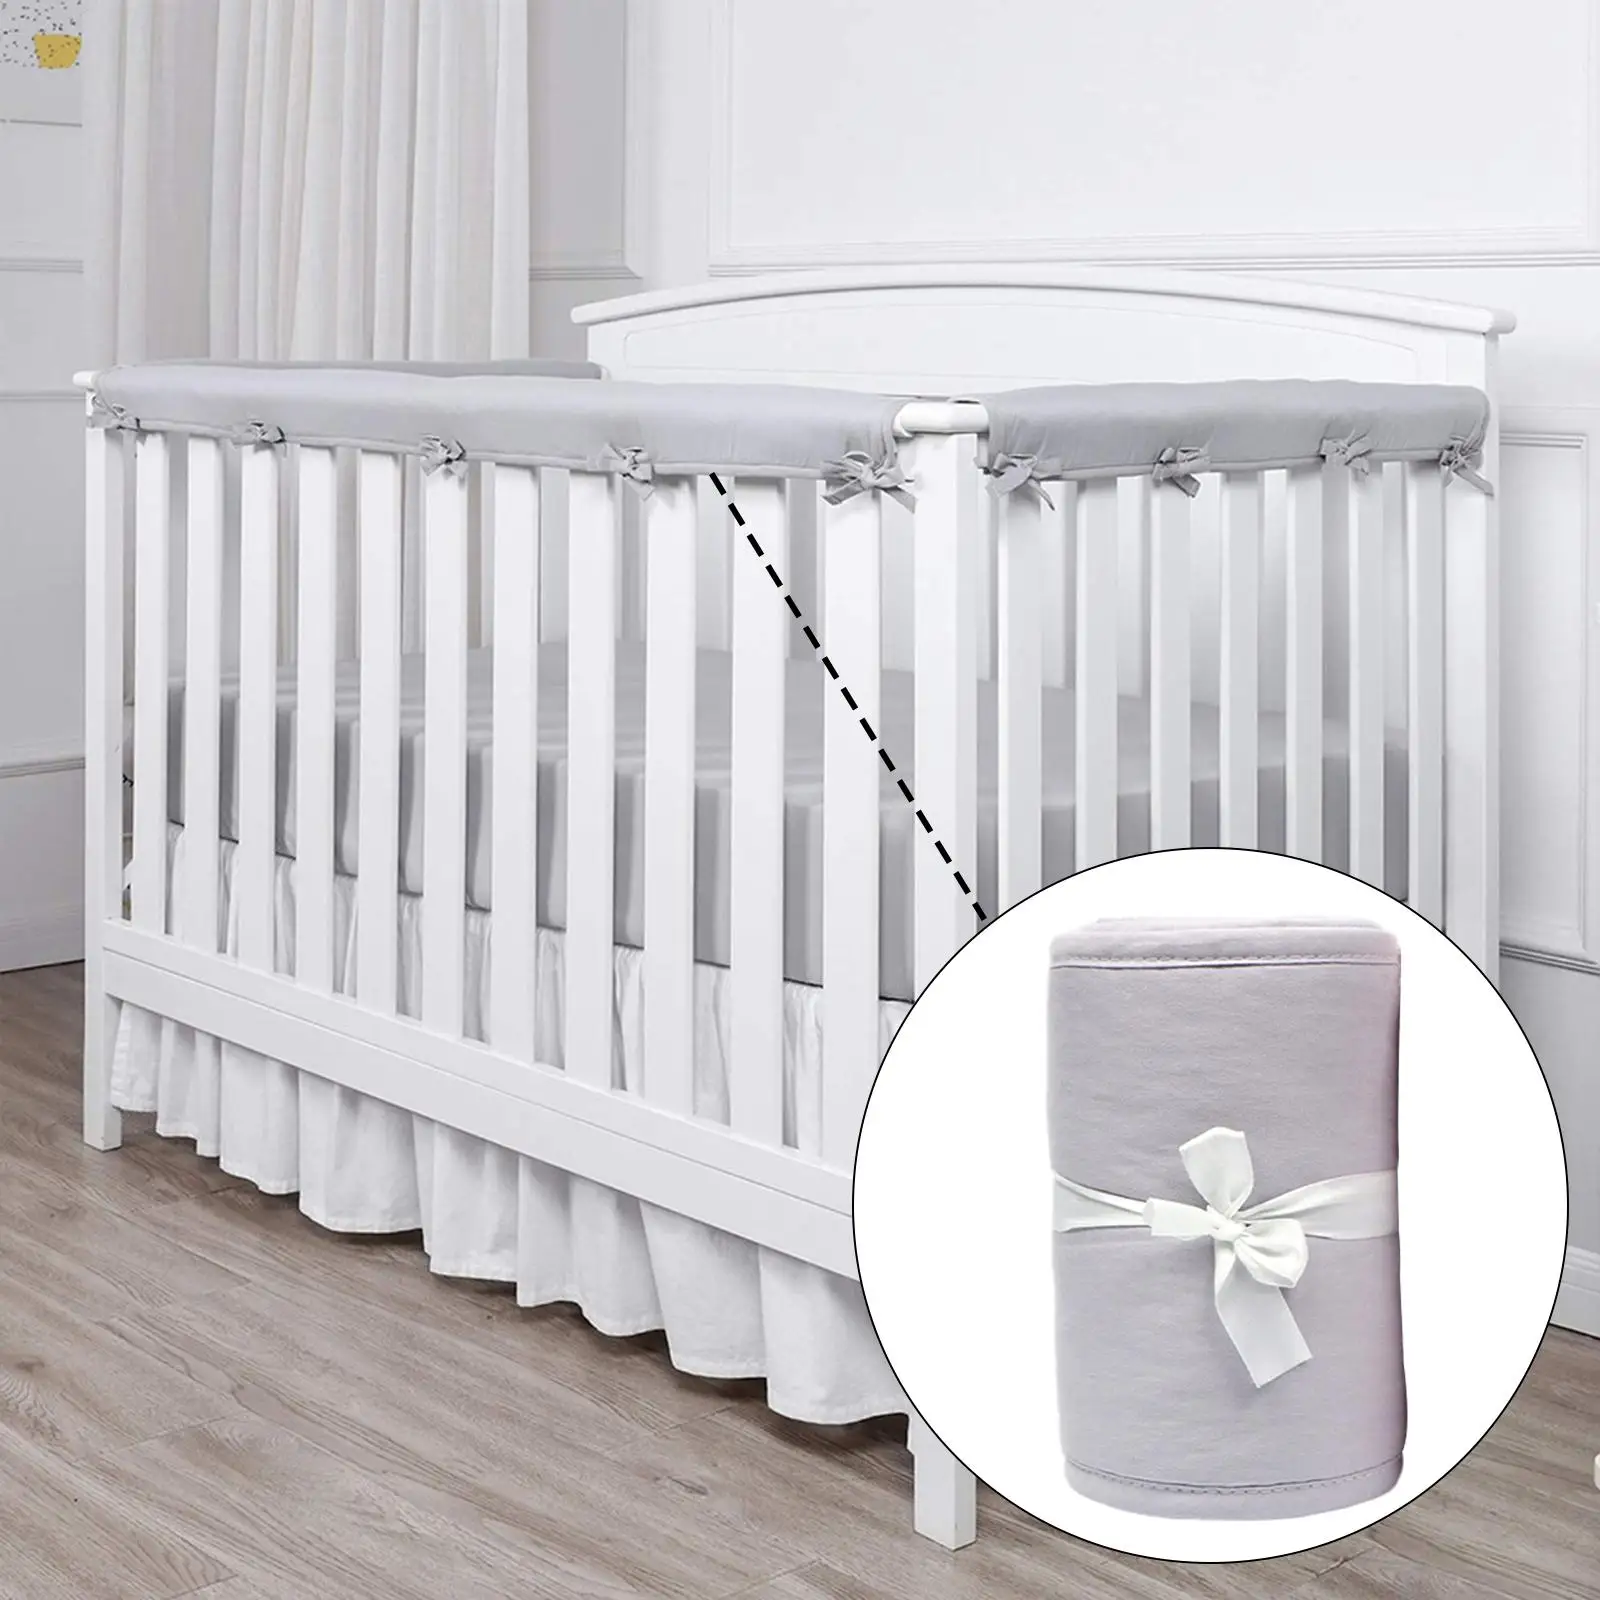 3Pcs Bed Anti Collision Striping Protector Products Guard Crib Bed for Gifts Toddlers